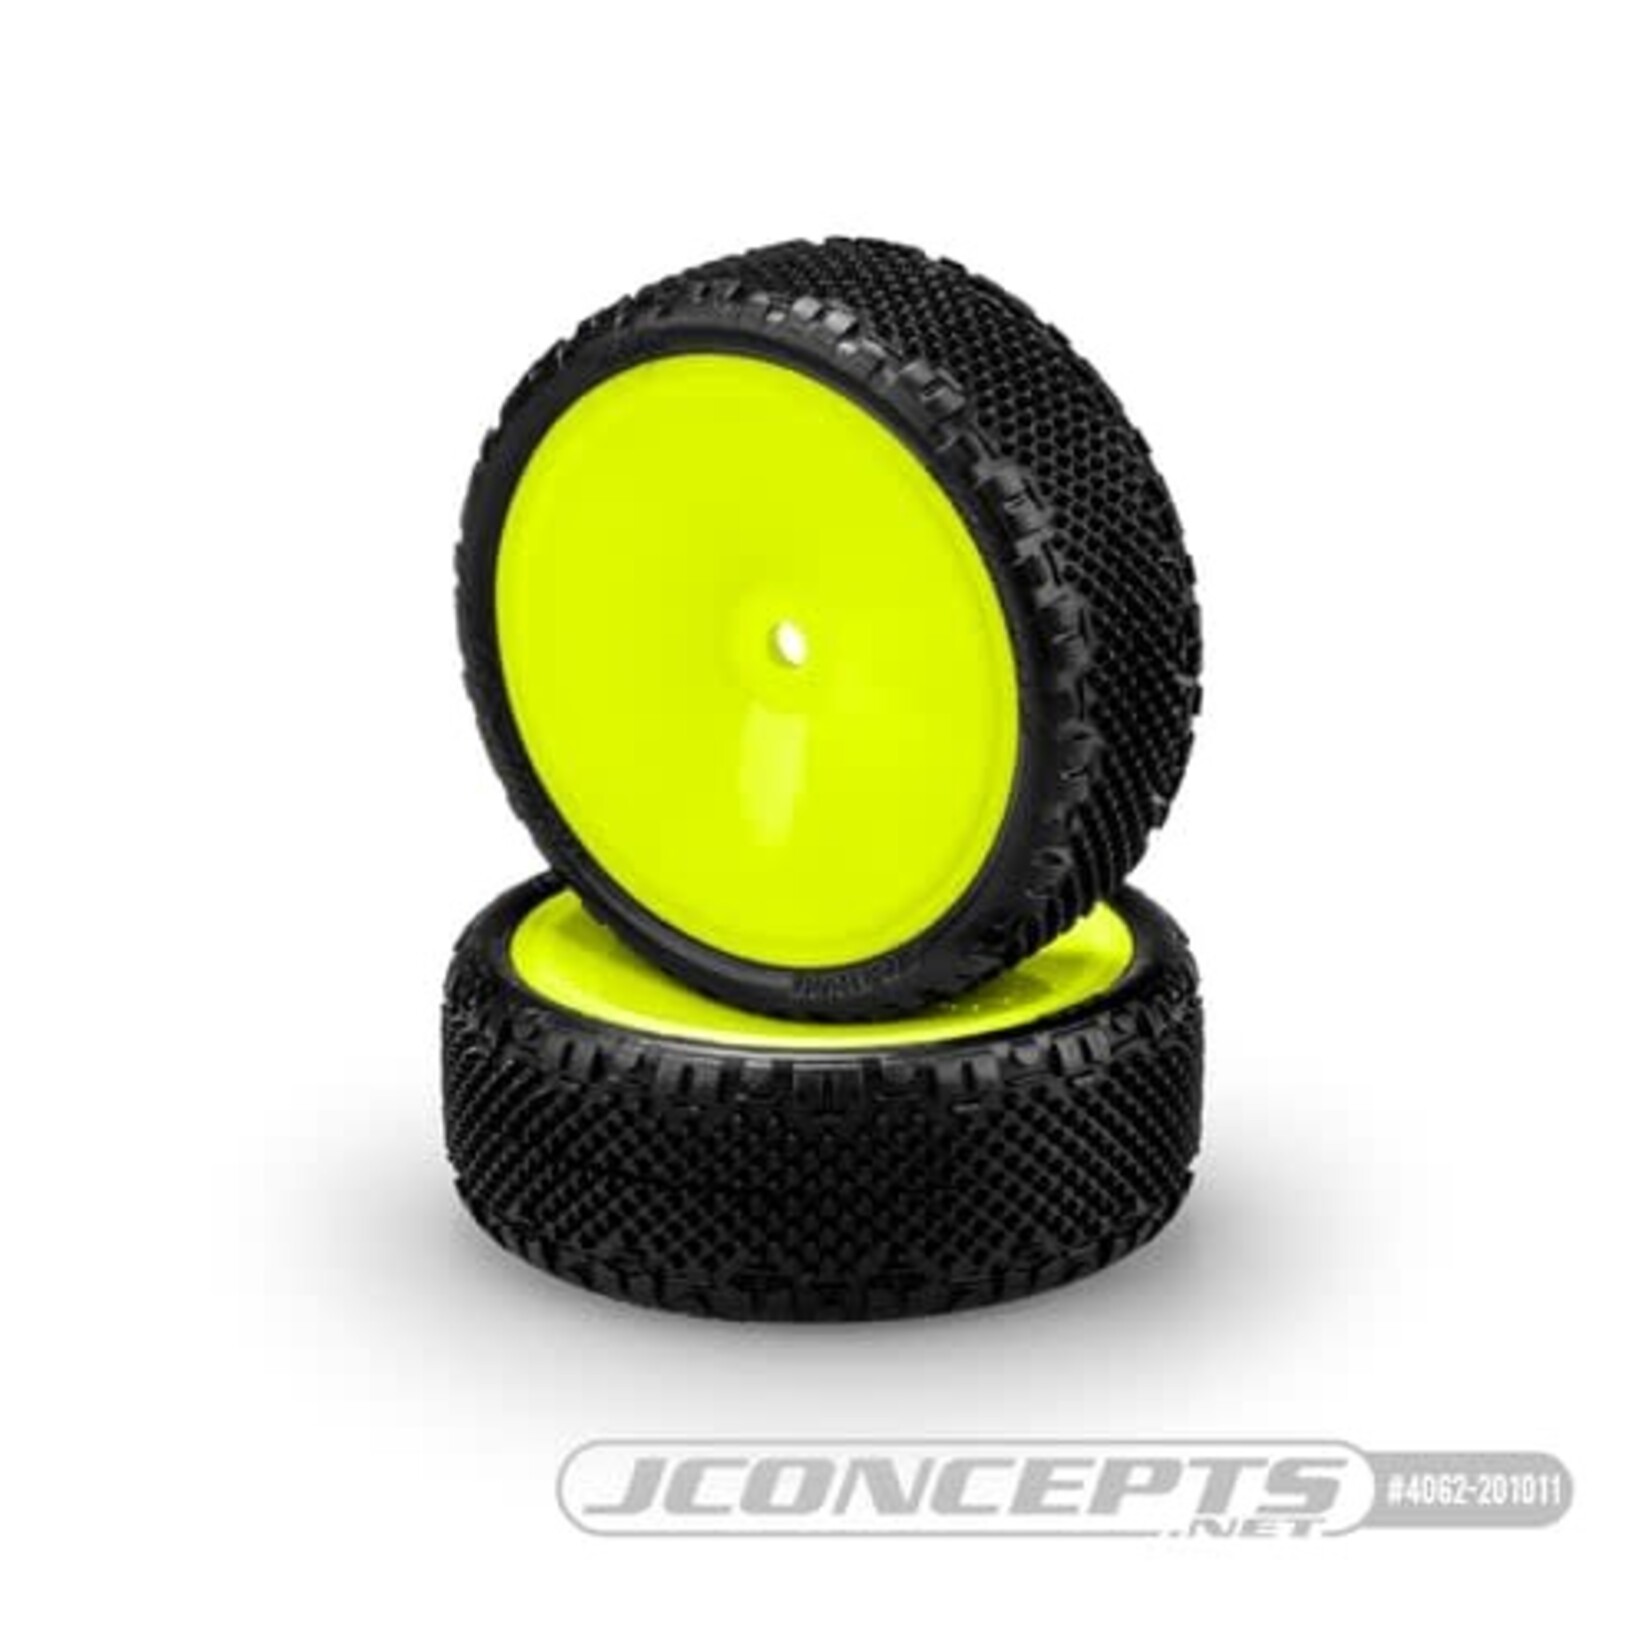 JConcepts JConcepts Pin Swag LP Wide 2.2" Pre-Mounted 2WD Front Buggy Carpet Tires (Yellow) (Pink) (2) w/12mm Hex #4062-201011